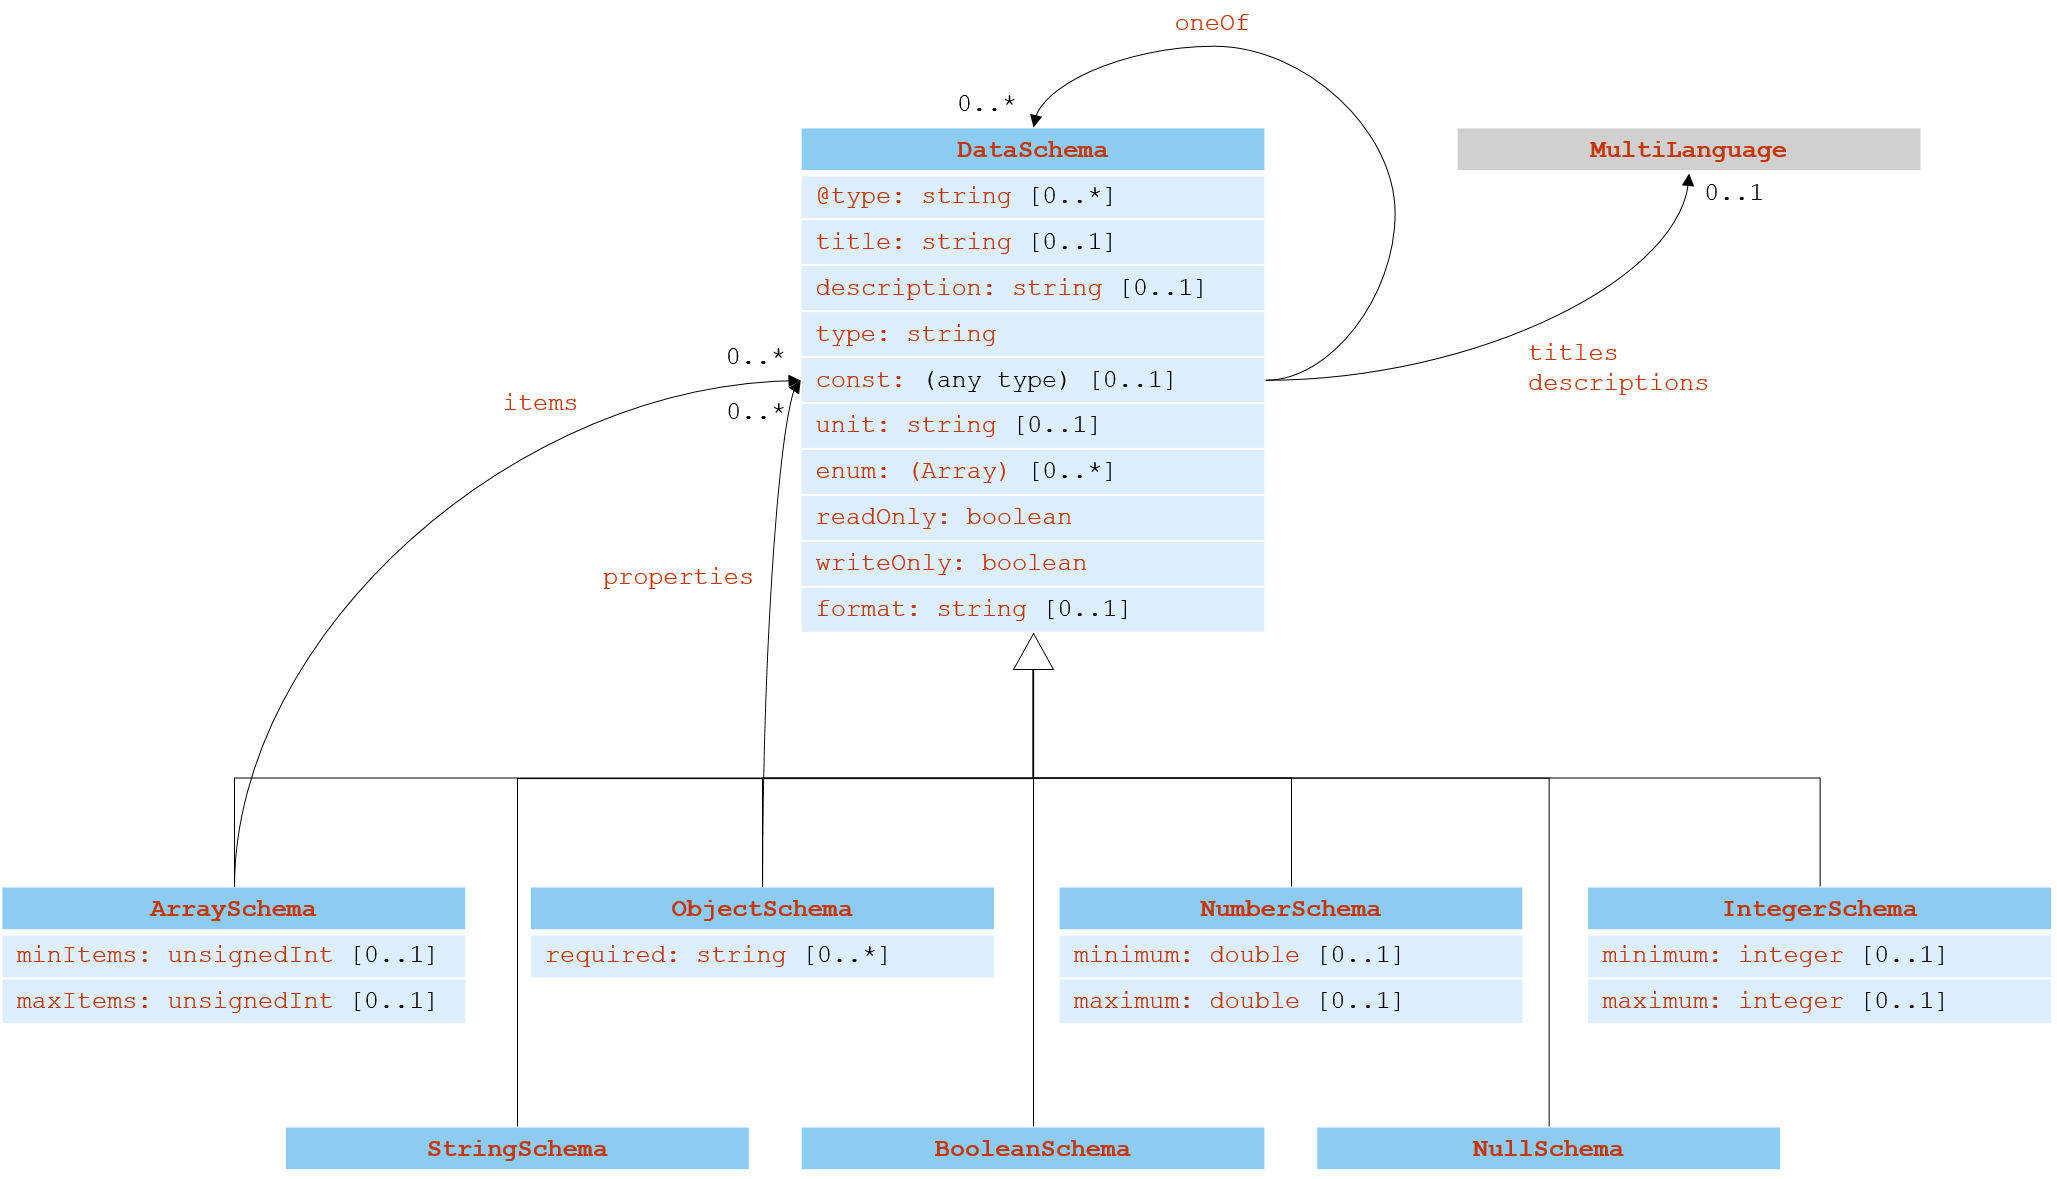 UML diagram of the TD information model for the Data schema vocabulary